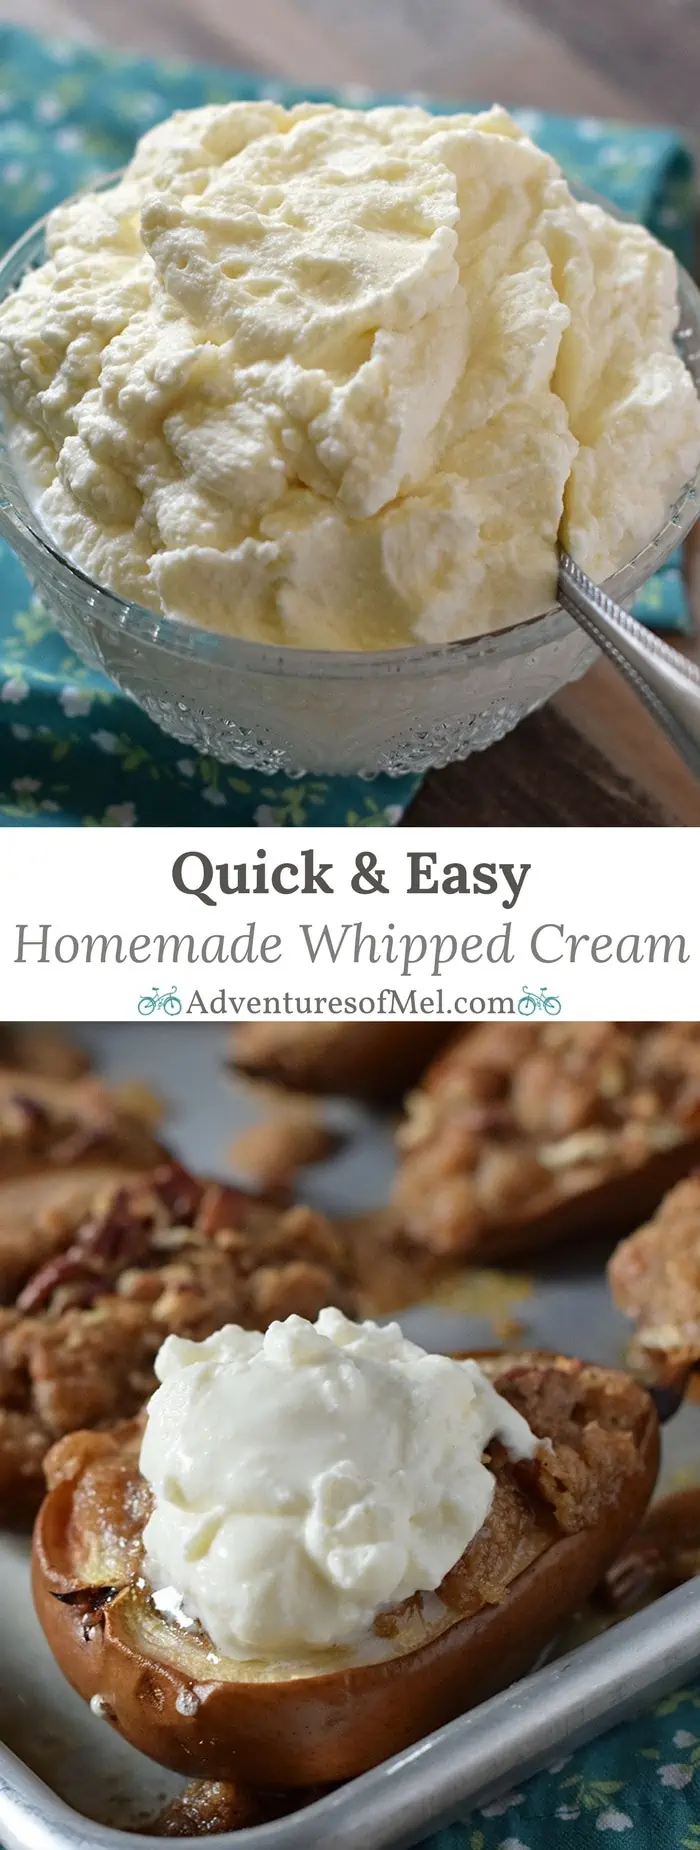 Homemade whipped cream can be made in 5 minutes with this easy recipe. Only 4 ingredients, including a secret ingredient, to a creamy delicious topping for all your favorite desserts.